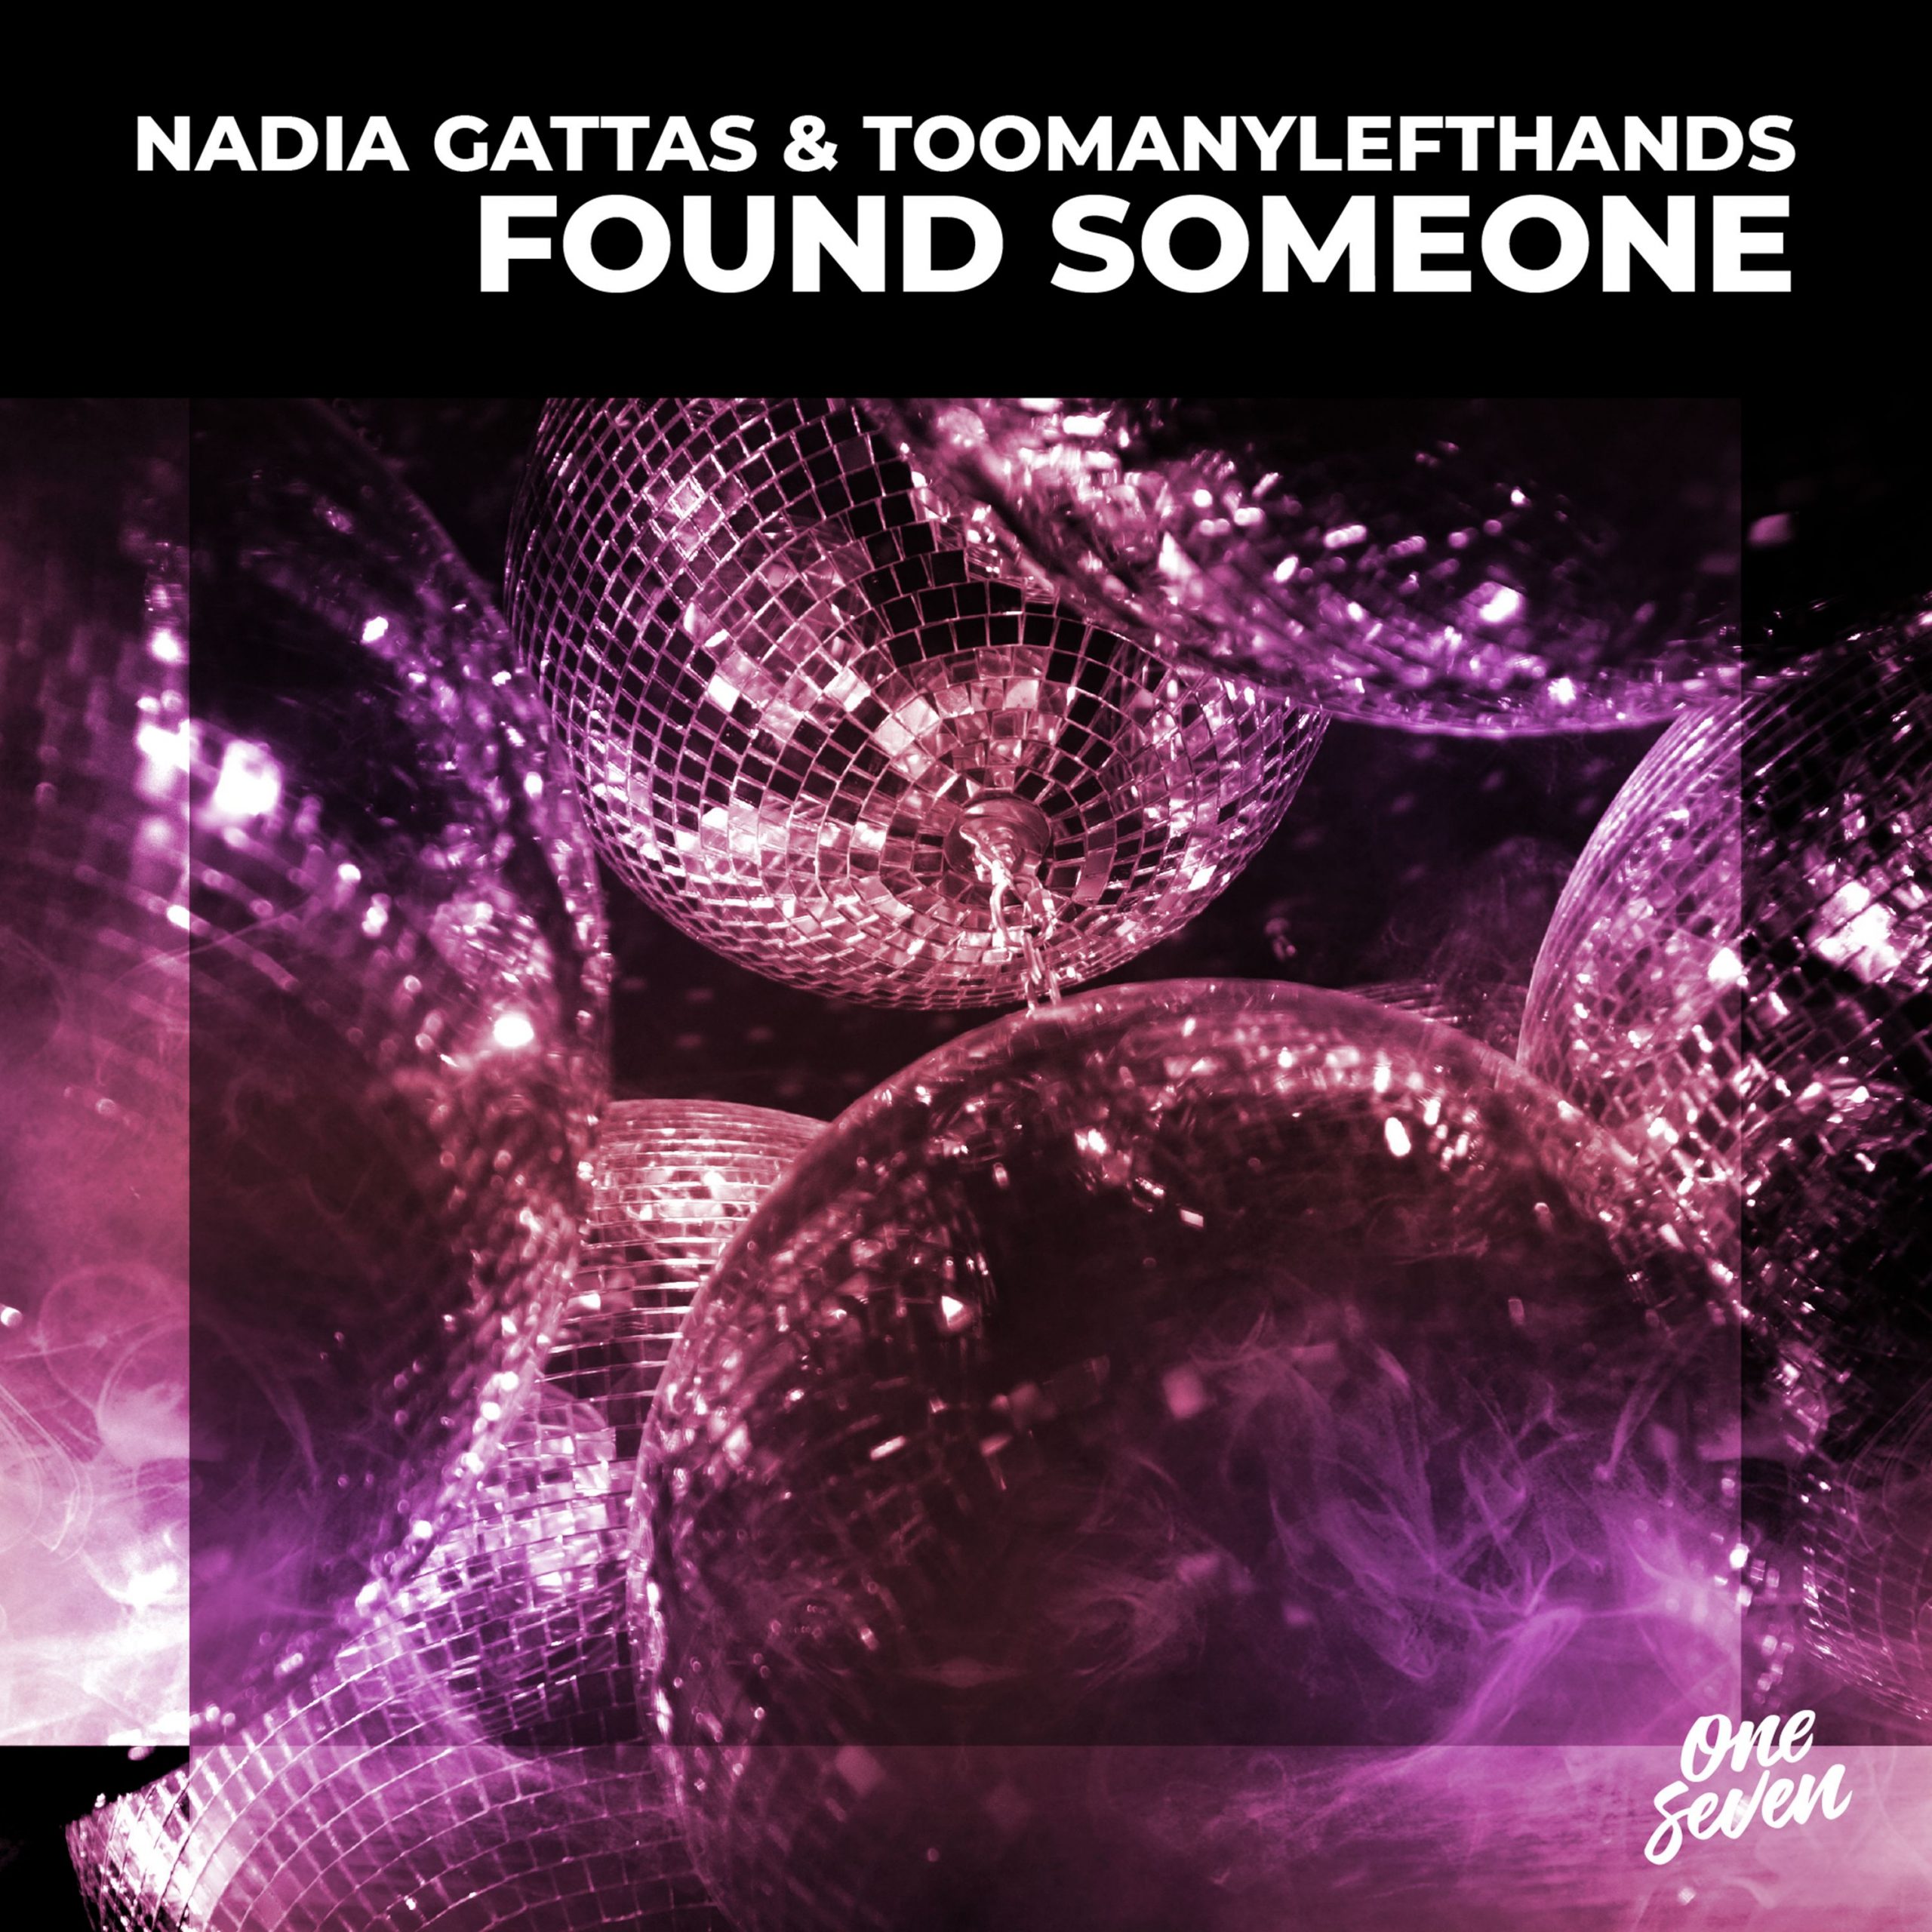 You are currently viewing SuperNova: Nadia Gattas – Found Someone (07.02)